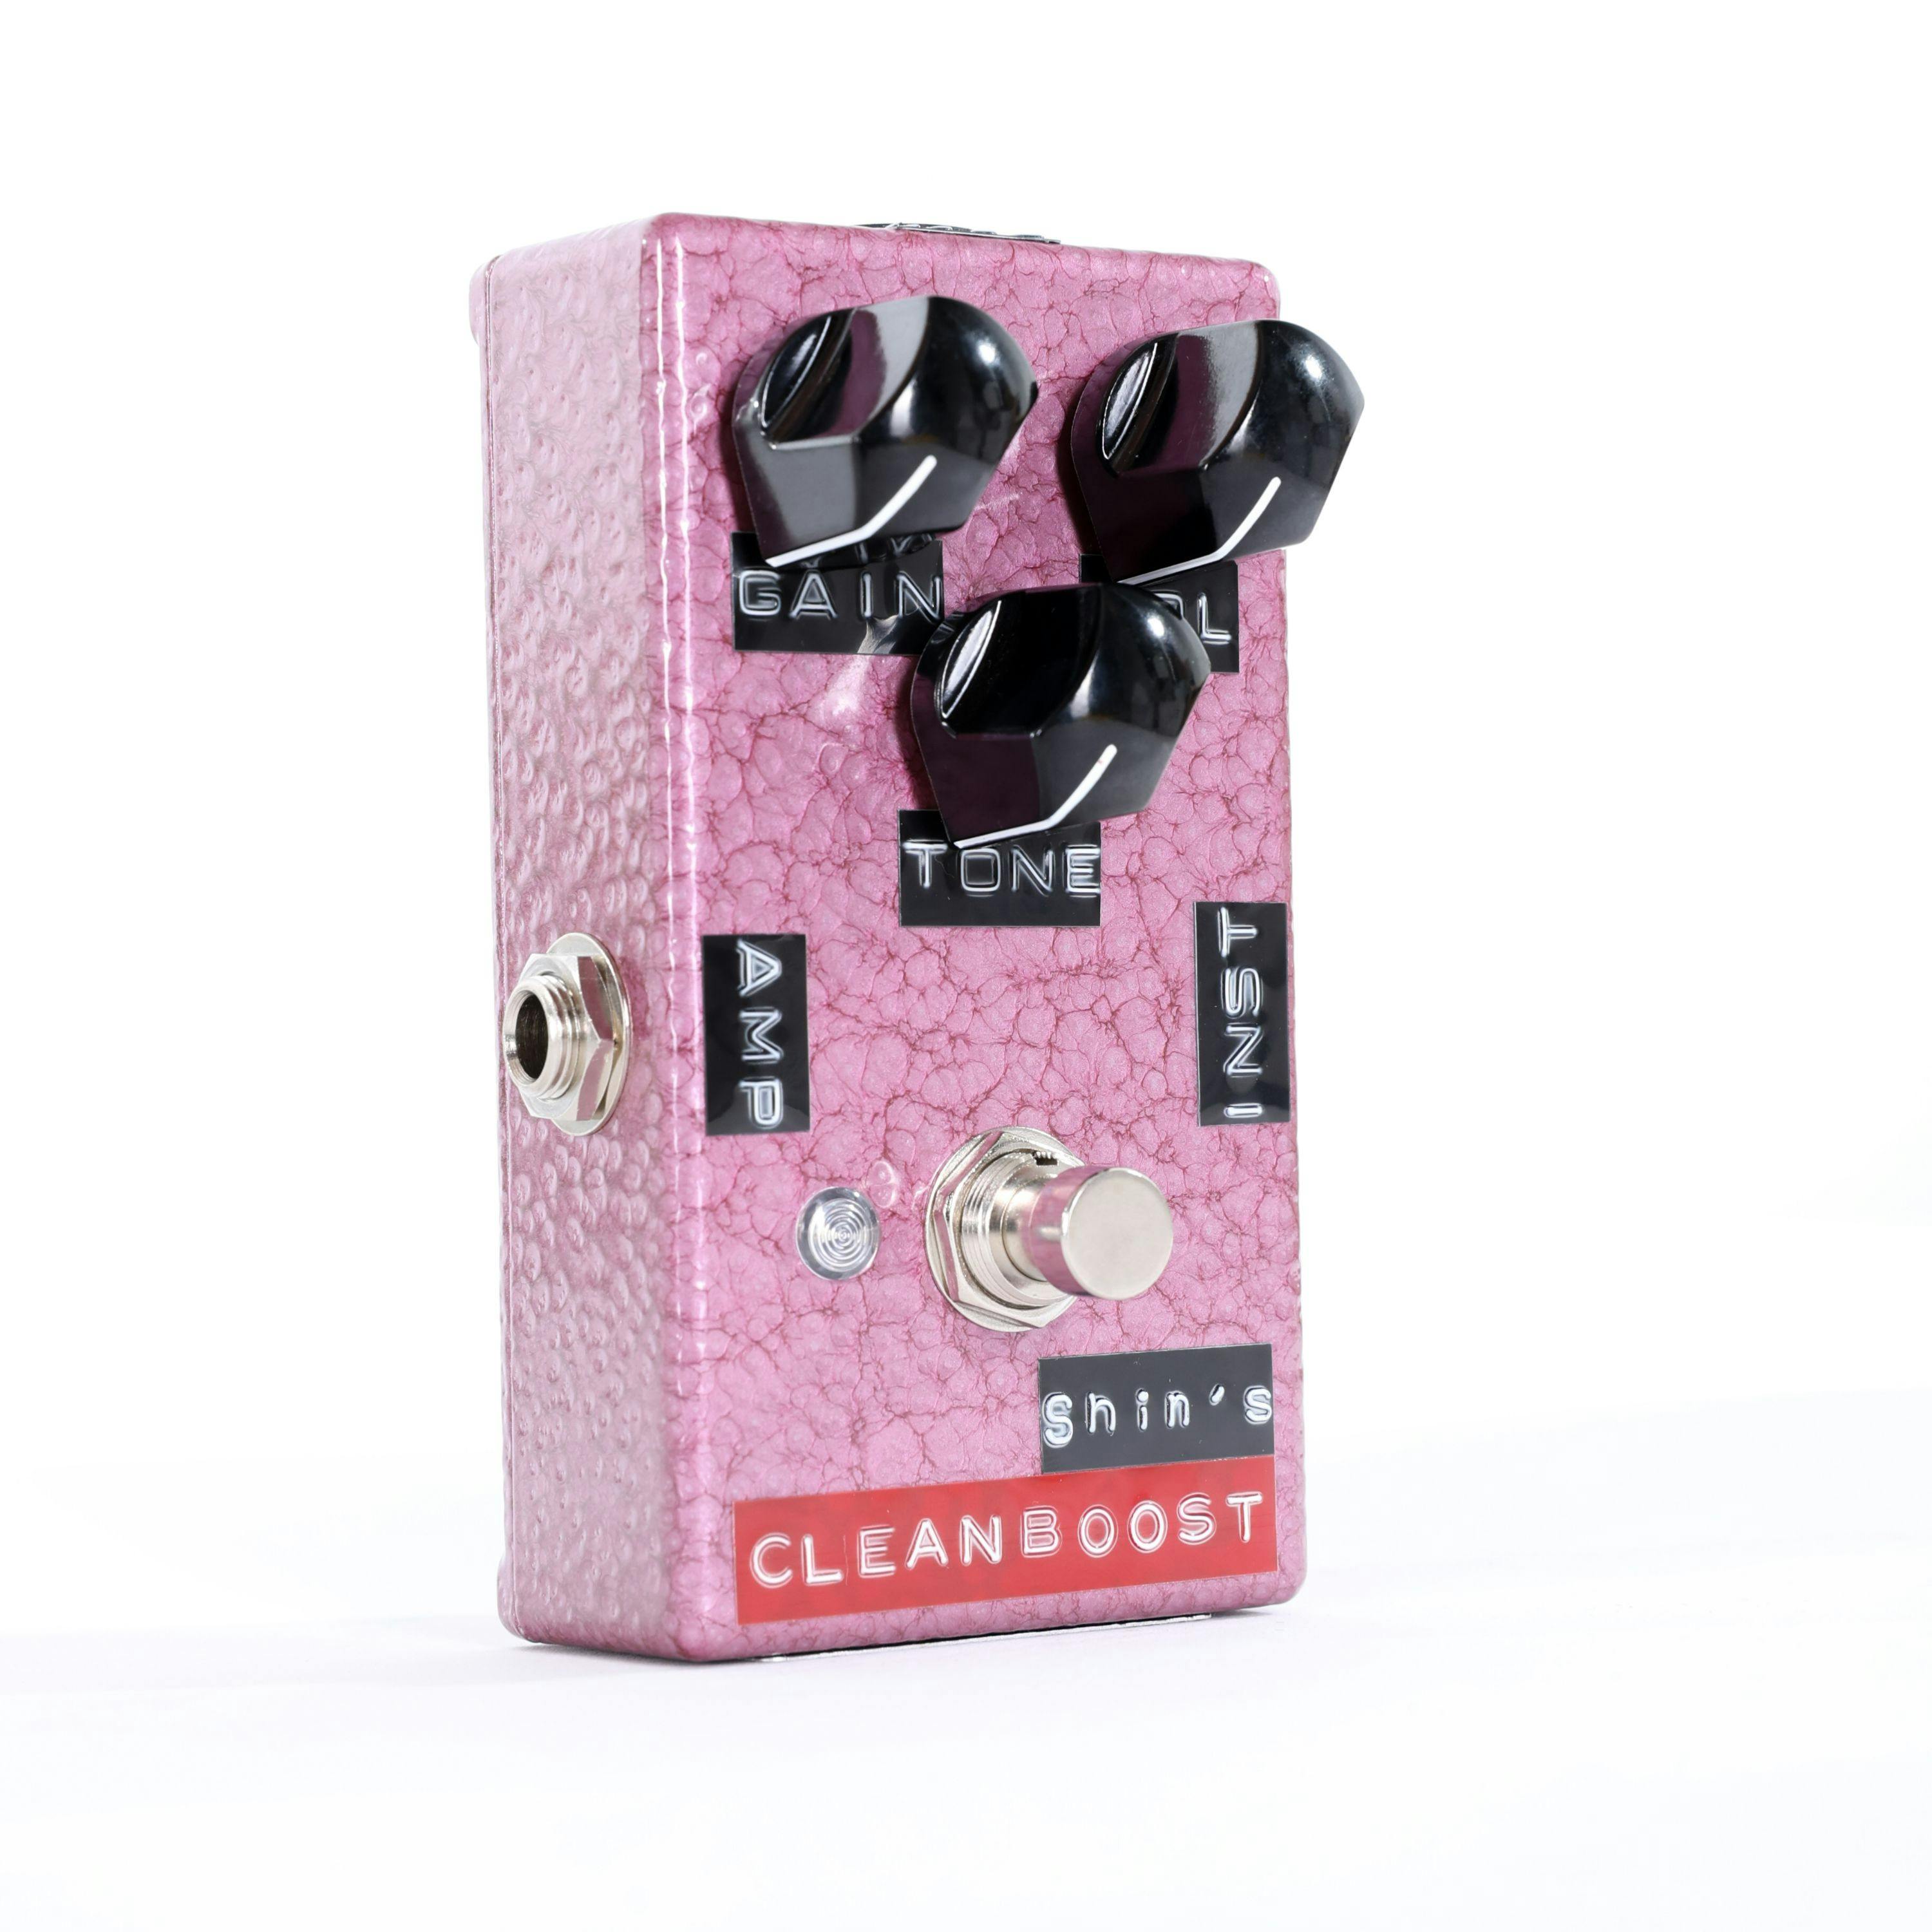 Shin's Music Clean Boost Pedal in Vintage Raspberry - Andertons Music Co.